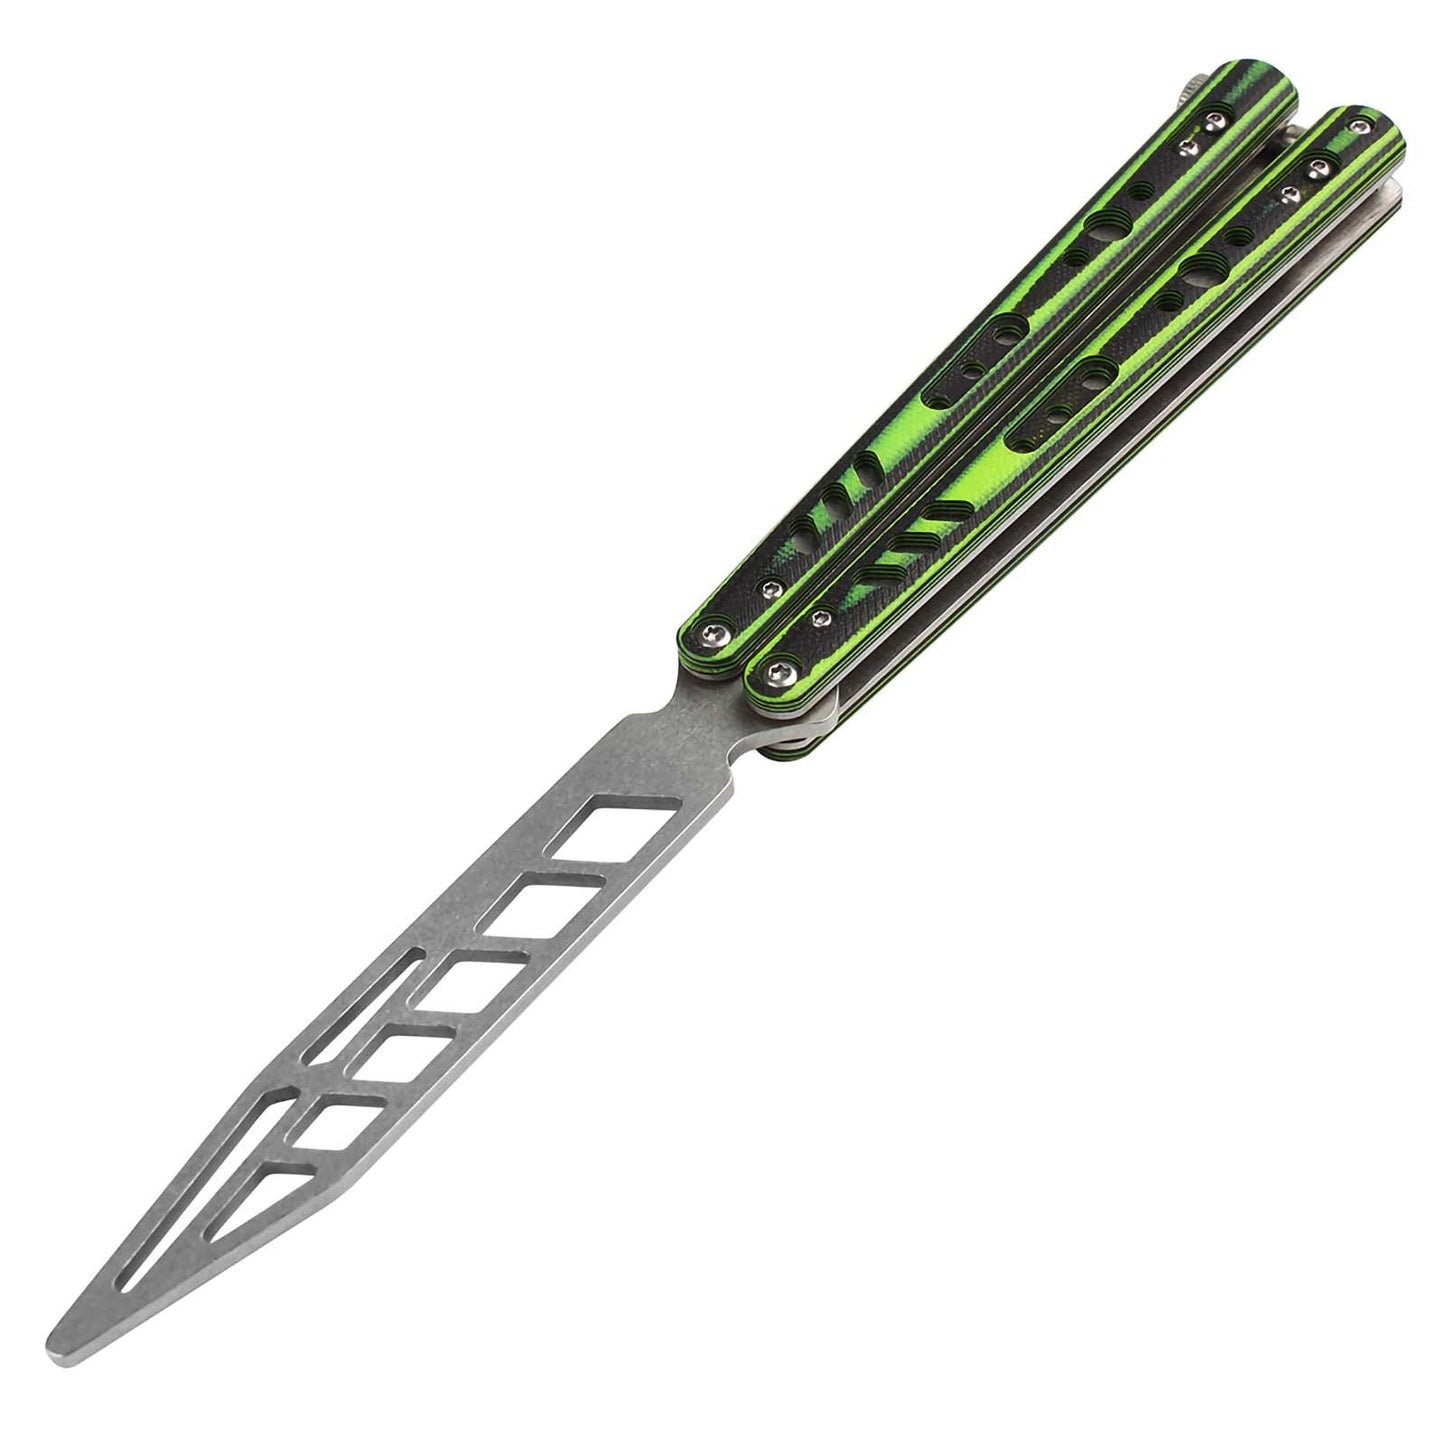 Andux Balisong Flip Training Tool CSGO CS/HDD40 Green(Only Available in European Countries)